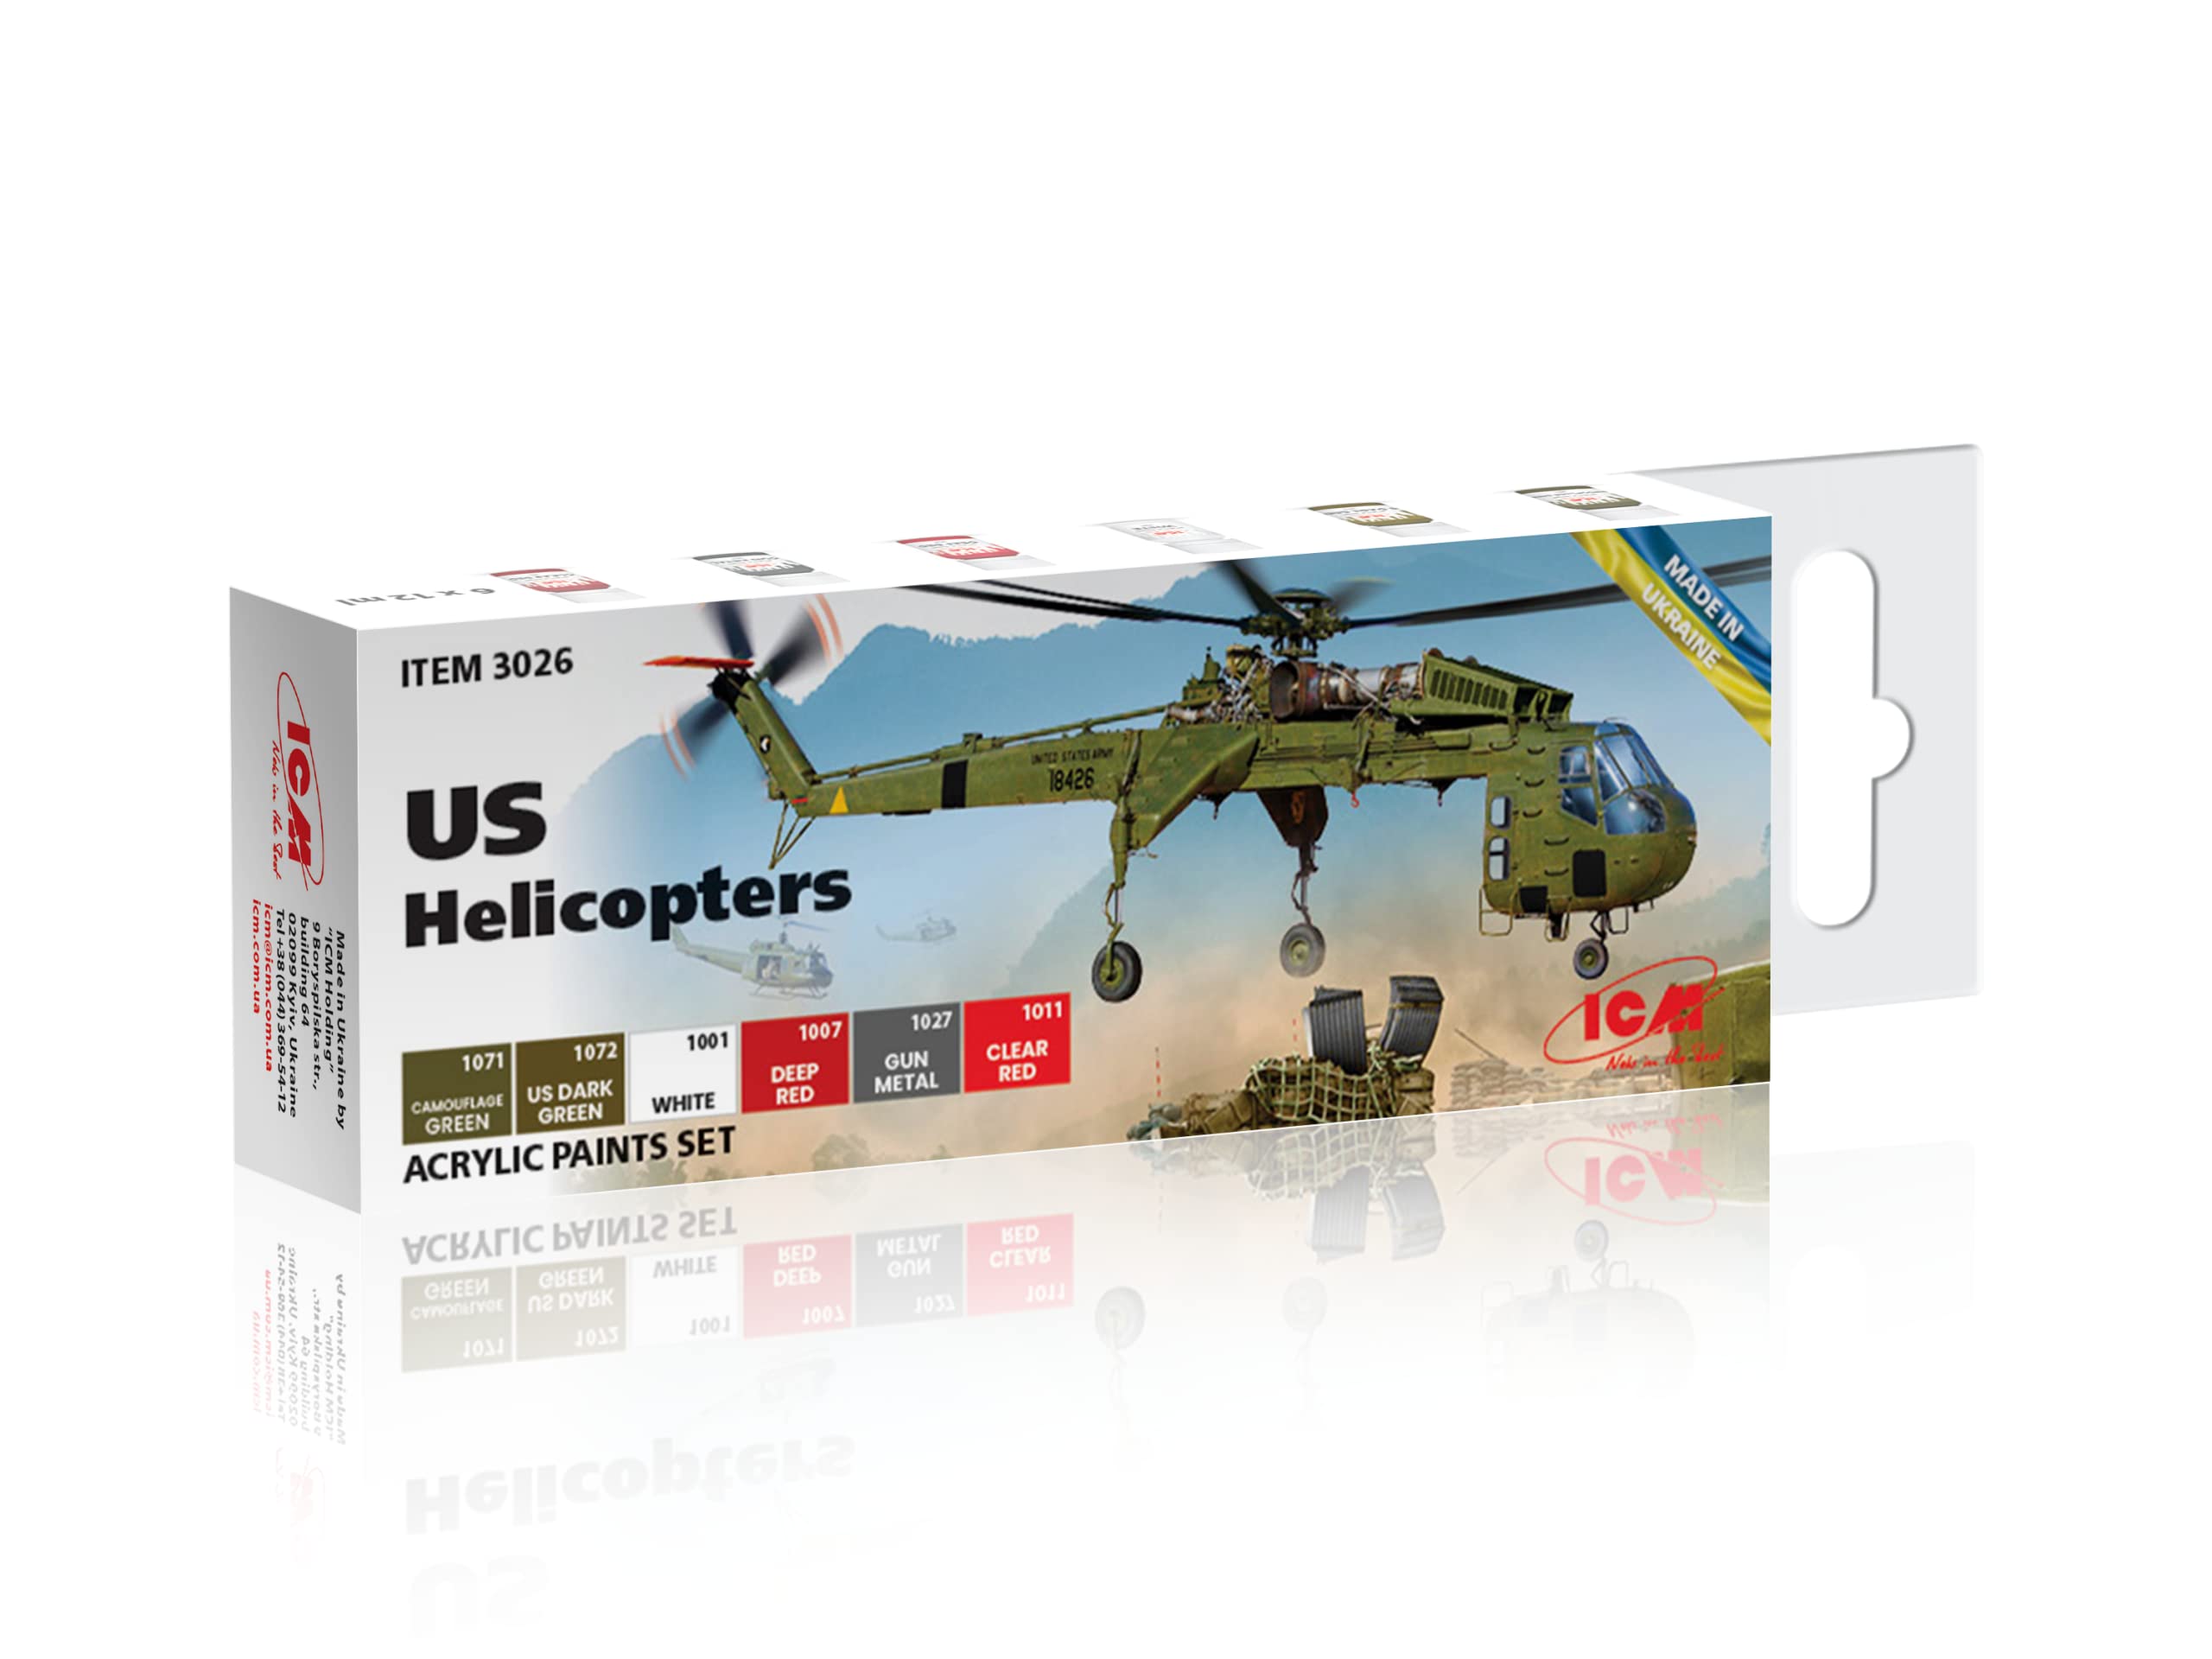 ICM 3026 - Acrylic paint set for US Helicopters